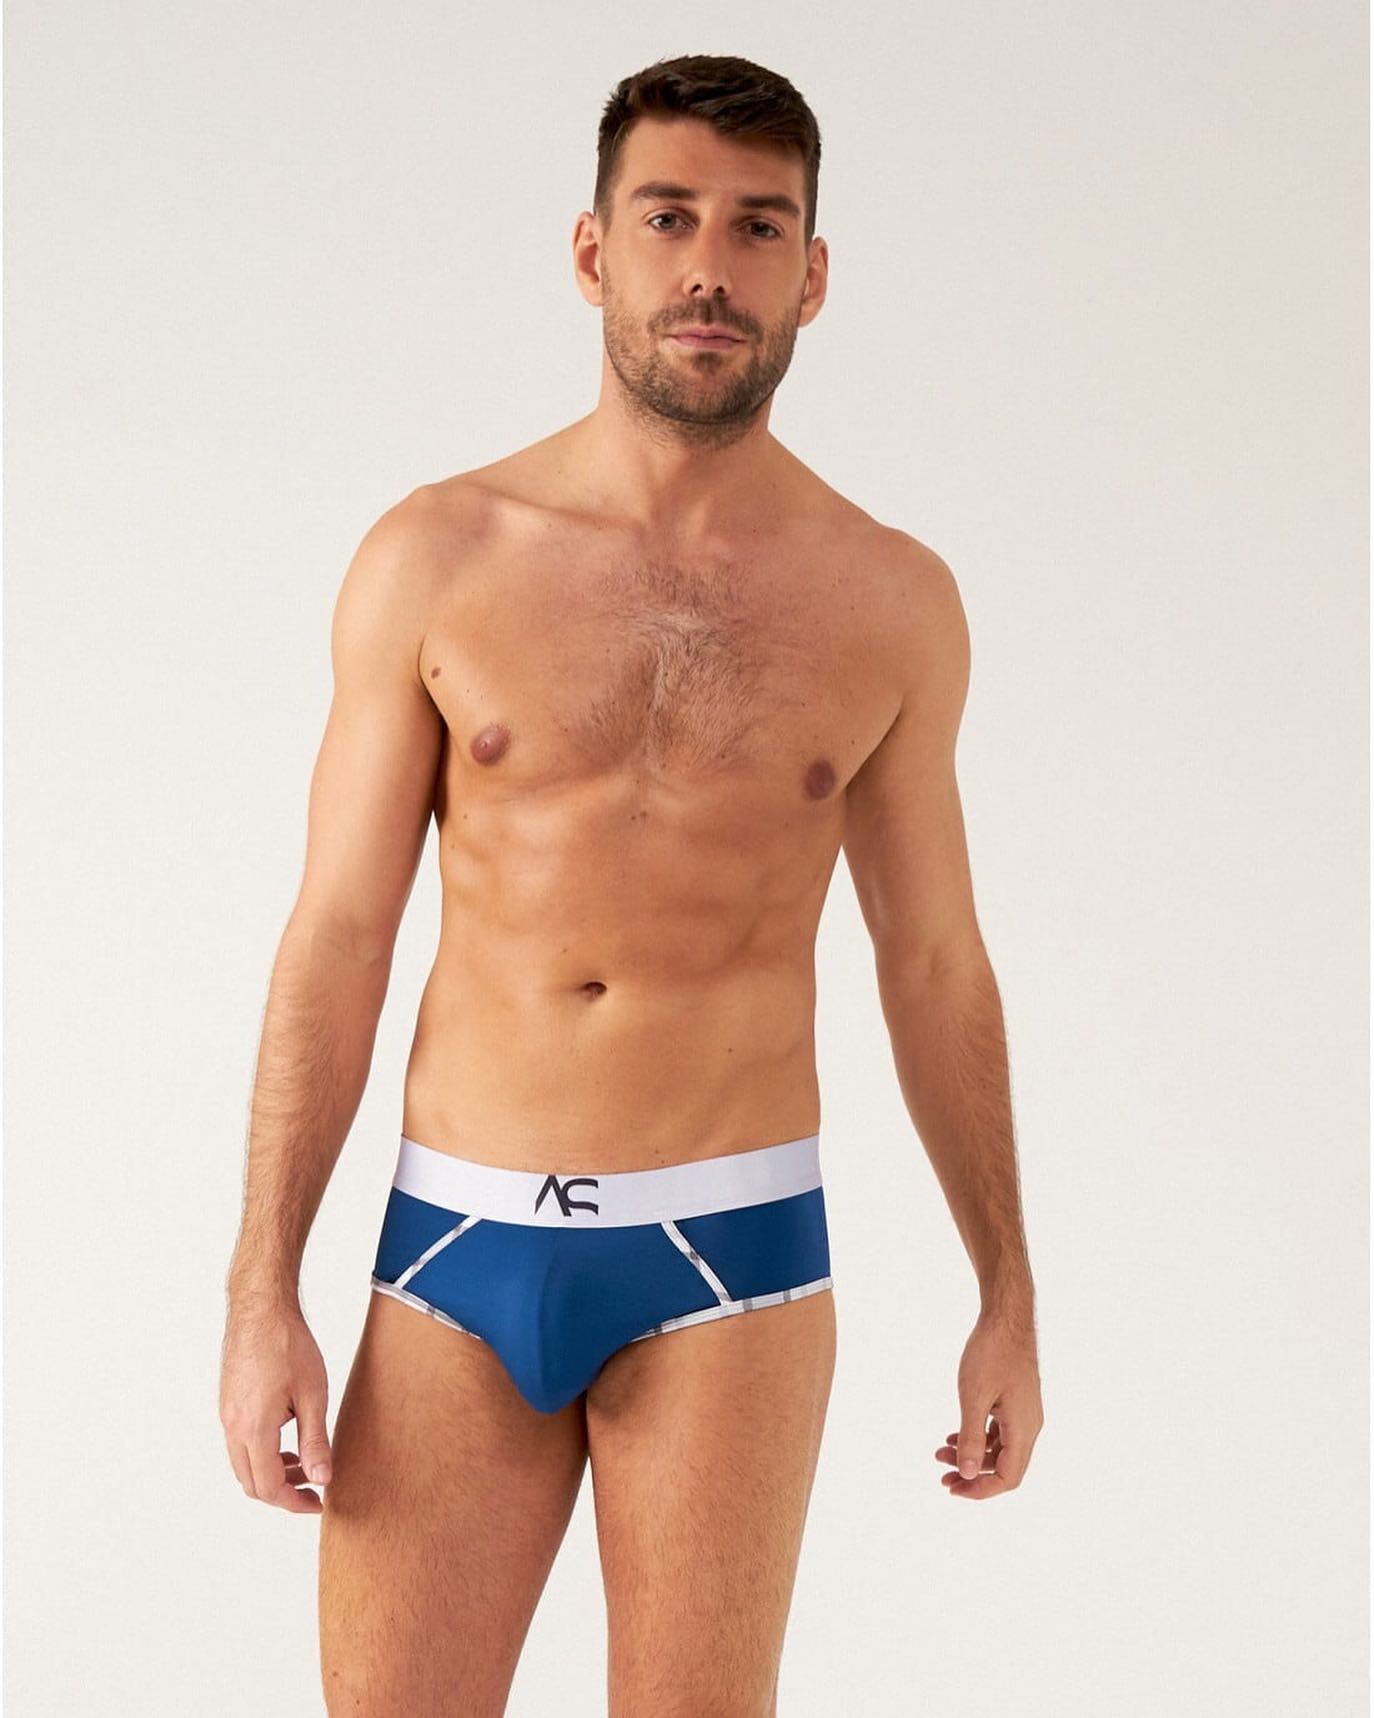 Our underwear suggestion today is the Adam Smith Saltire Briefs in navy blue. Would you wear it?
____
http://www.menandunderwear.com/2022/01/underwear-suggestion-adam-smith-saltire-briefs-navy.html